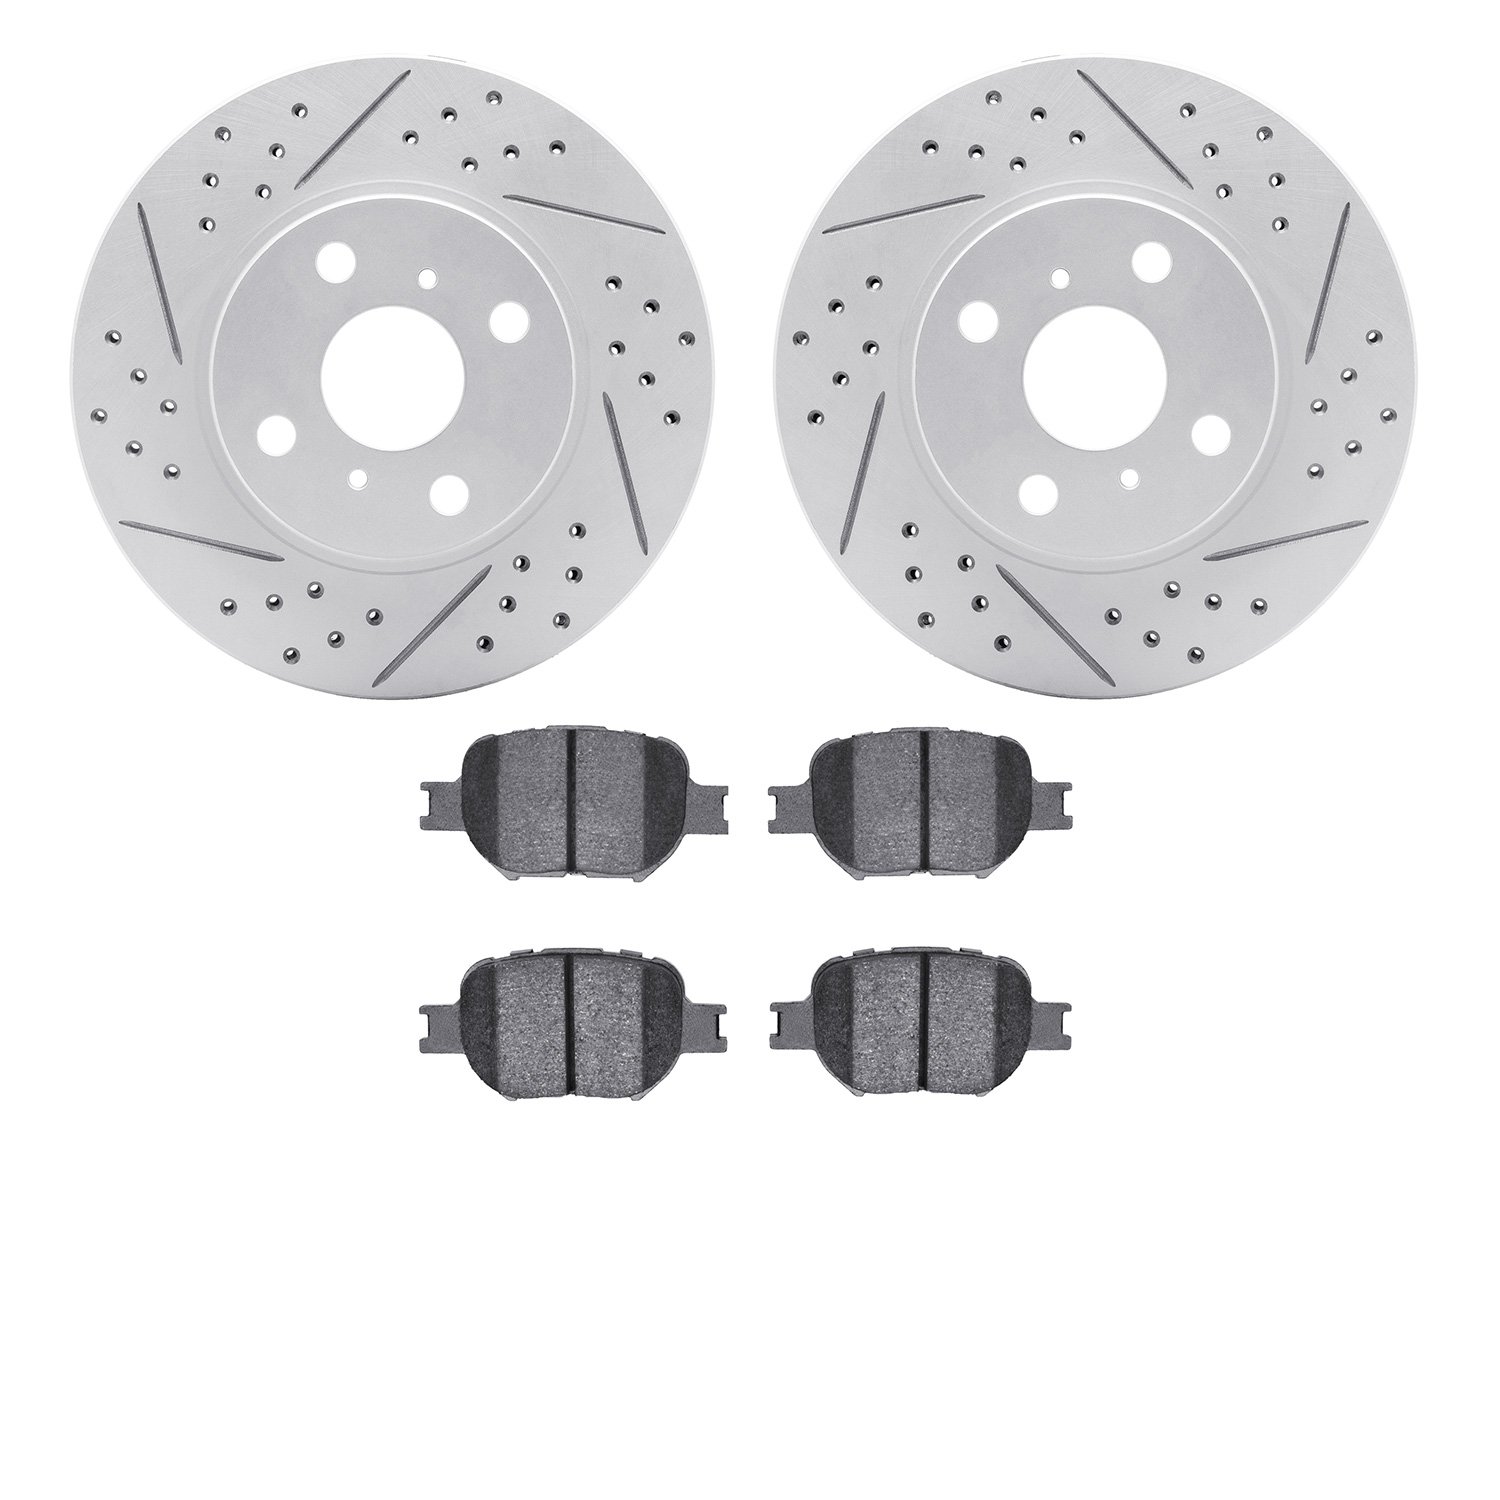 2502-76013 Geoperformance Drilled/Slotted Rotors w/5000 Advanced Brake Pads Kit, 2000-2010 Lexus/Toyota/Scion, Position: Front